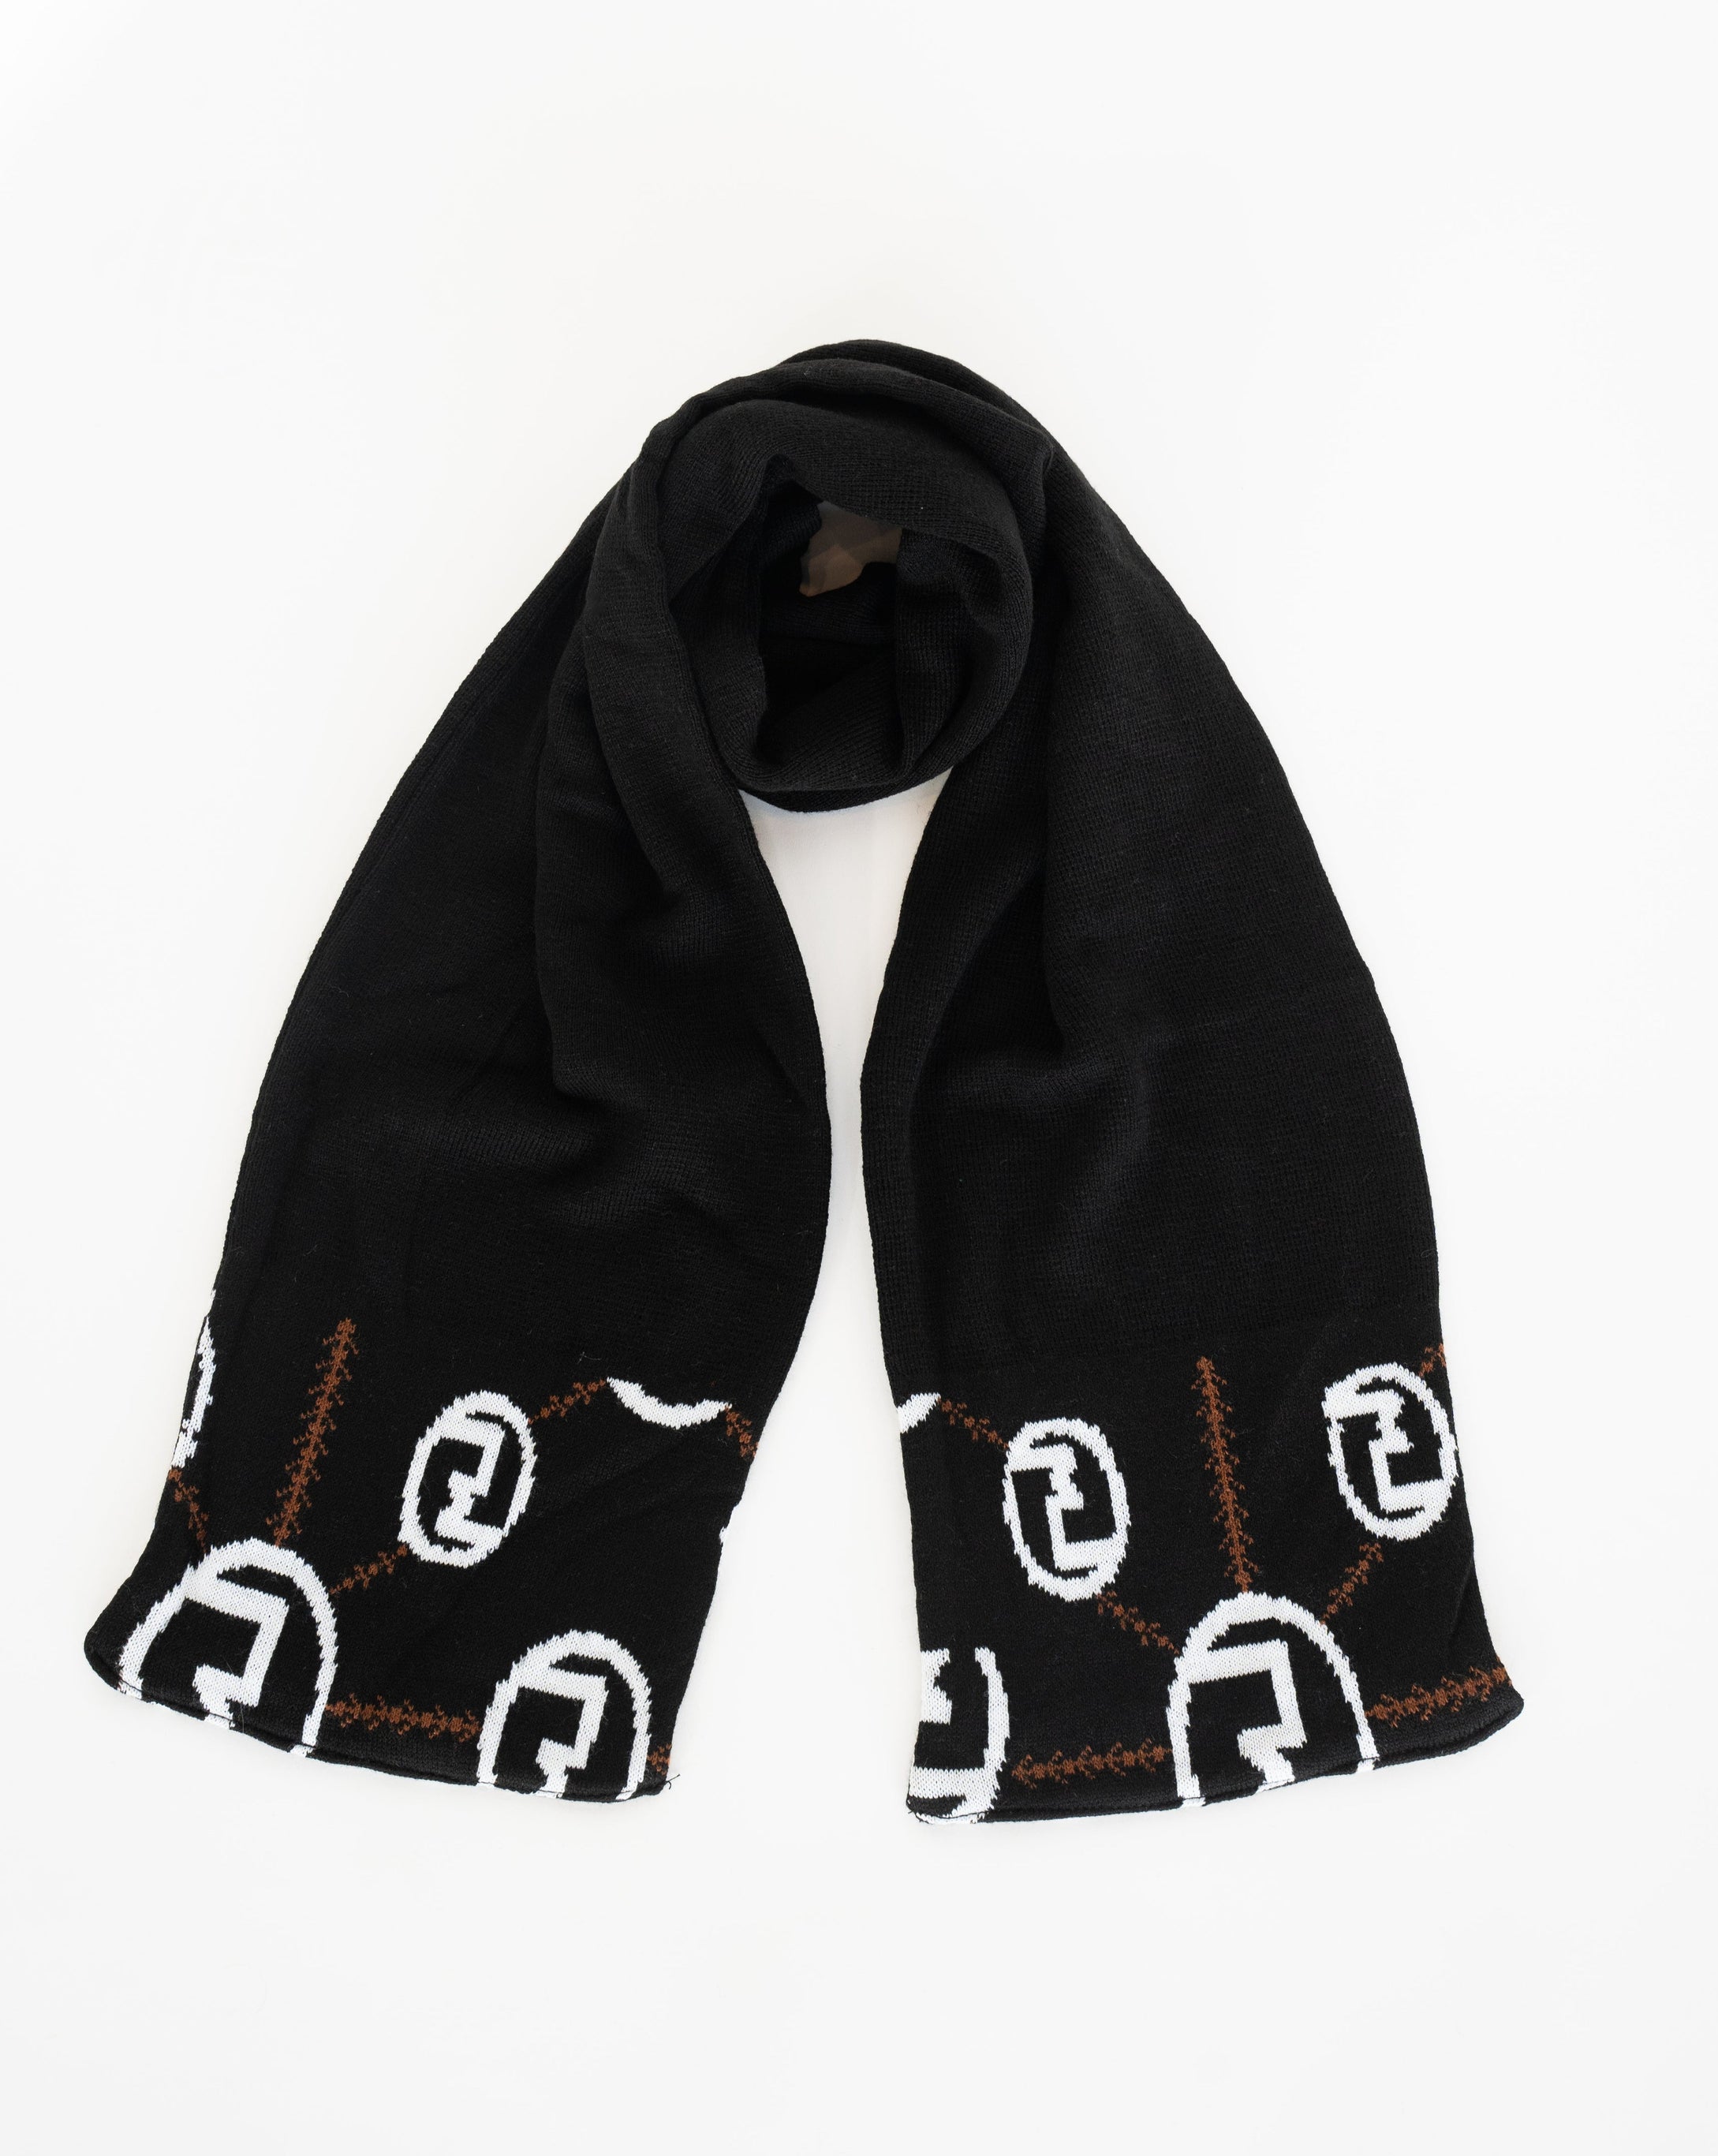 Black CoZ Scarf - Winter Accessories - Knitted Cotton